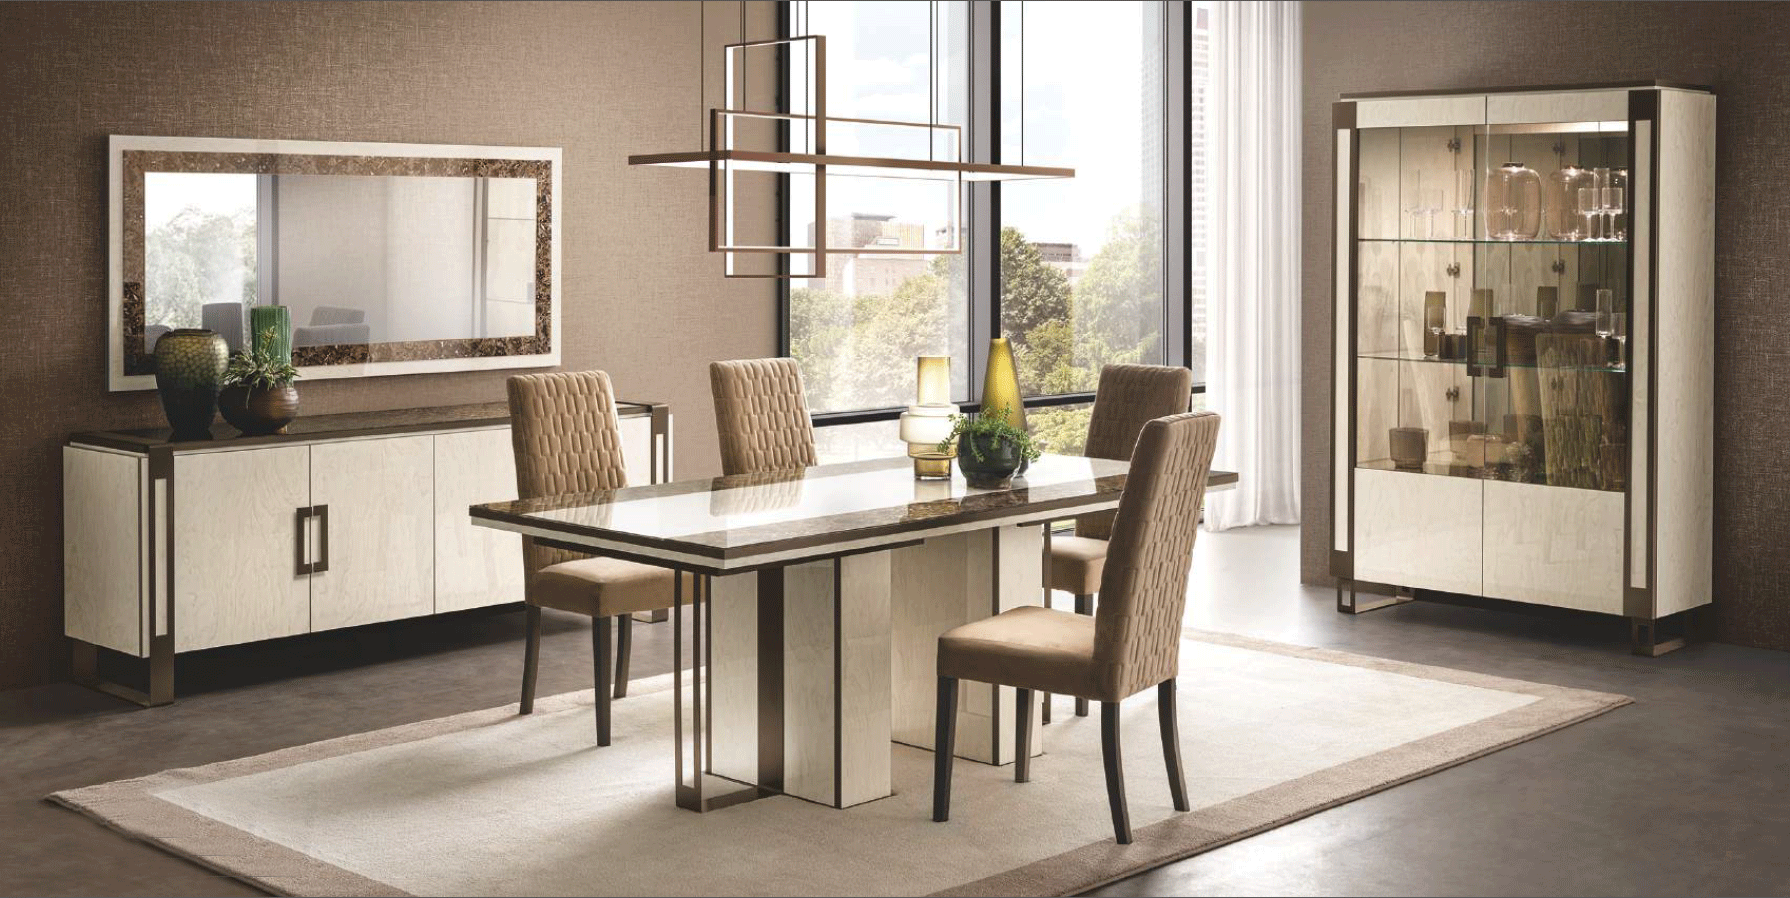 Dining Room Furniture Modern Dining Room Sets Poesia Dining room Additional items